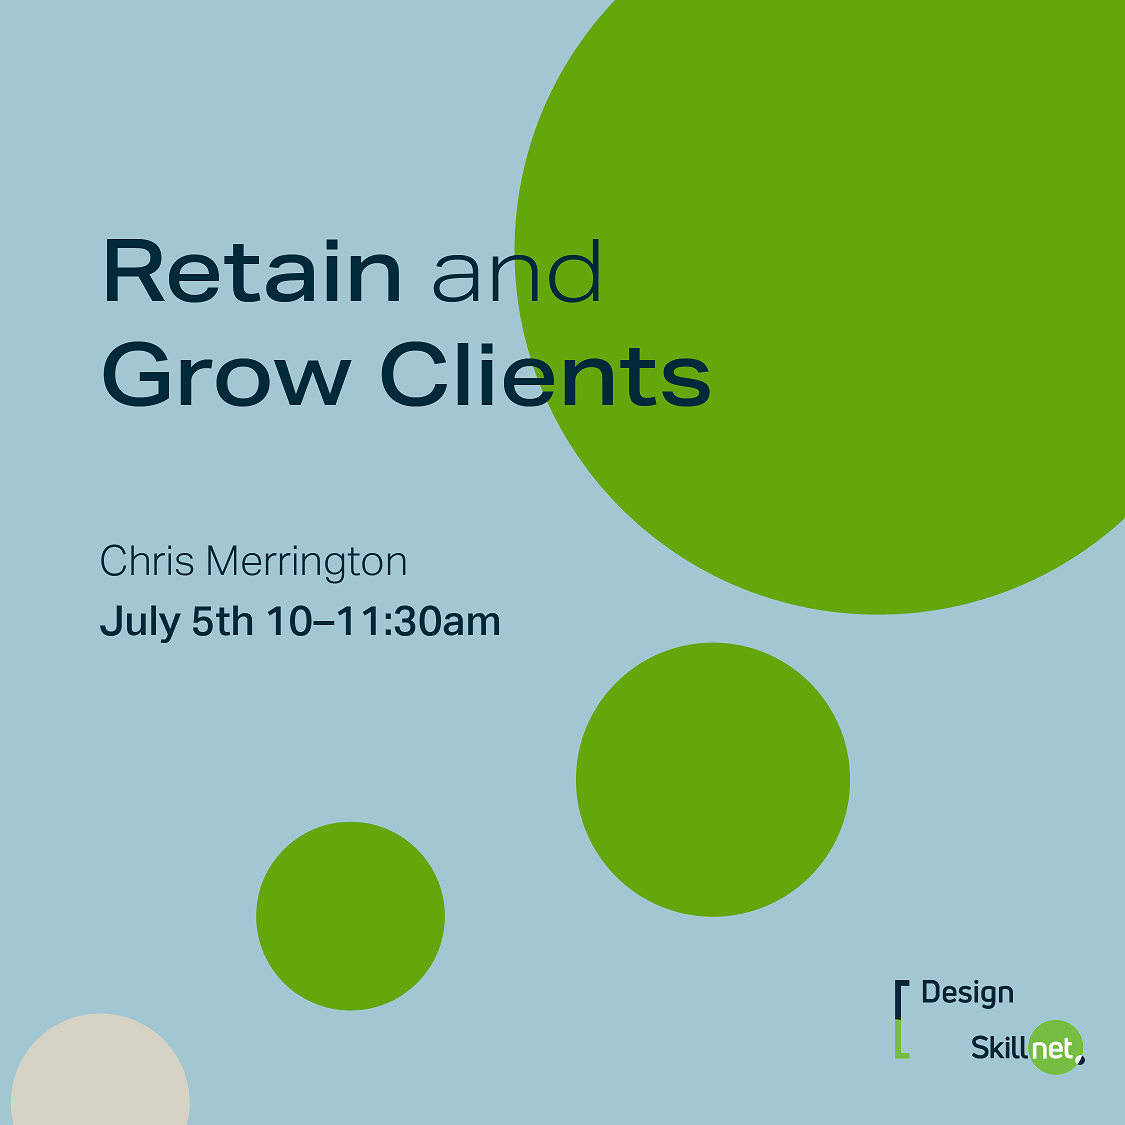 Retain and Grow Clients